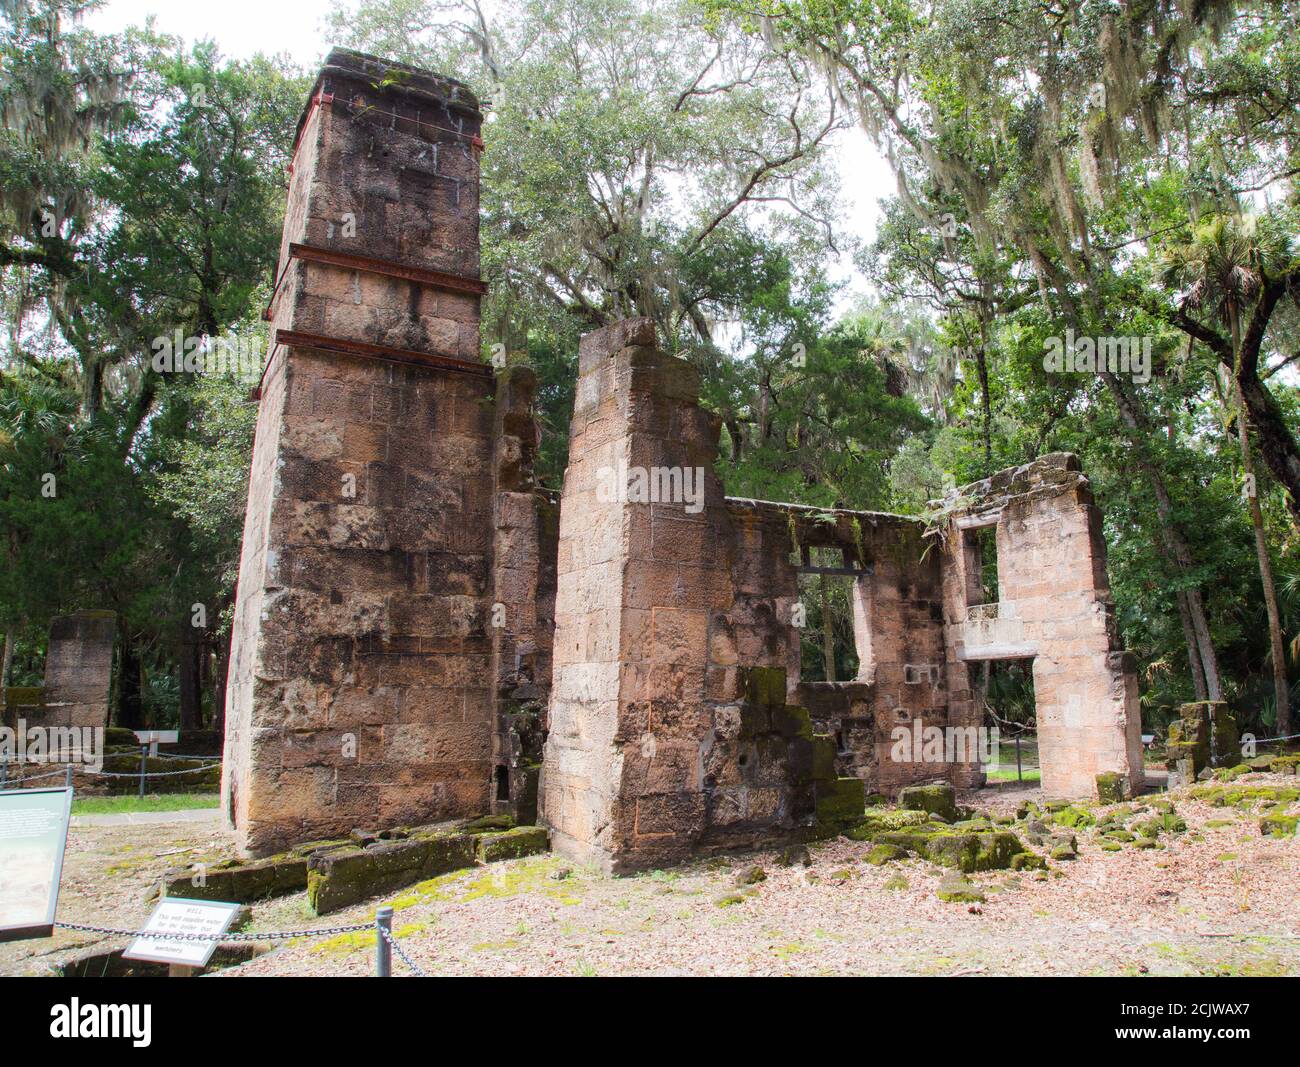 Bulow plantation sugar mill ruins in Florida. Plantation was destroyed in the Second Seminole War. Stock Photo